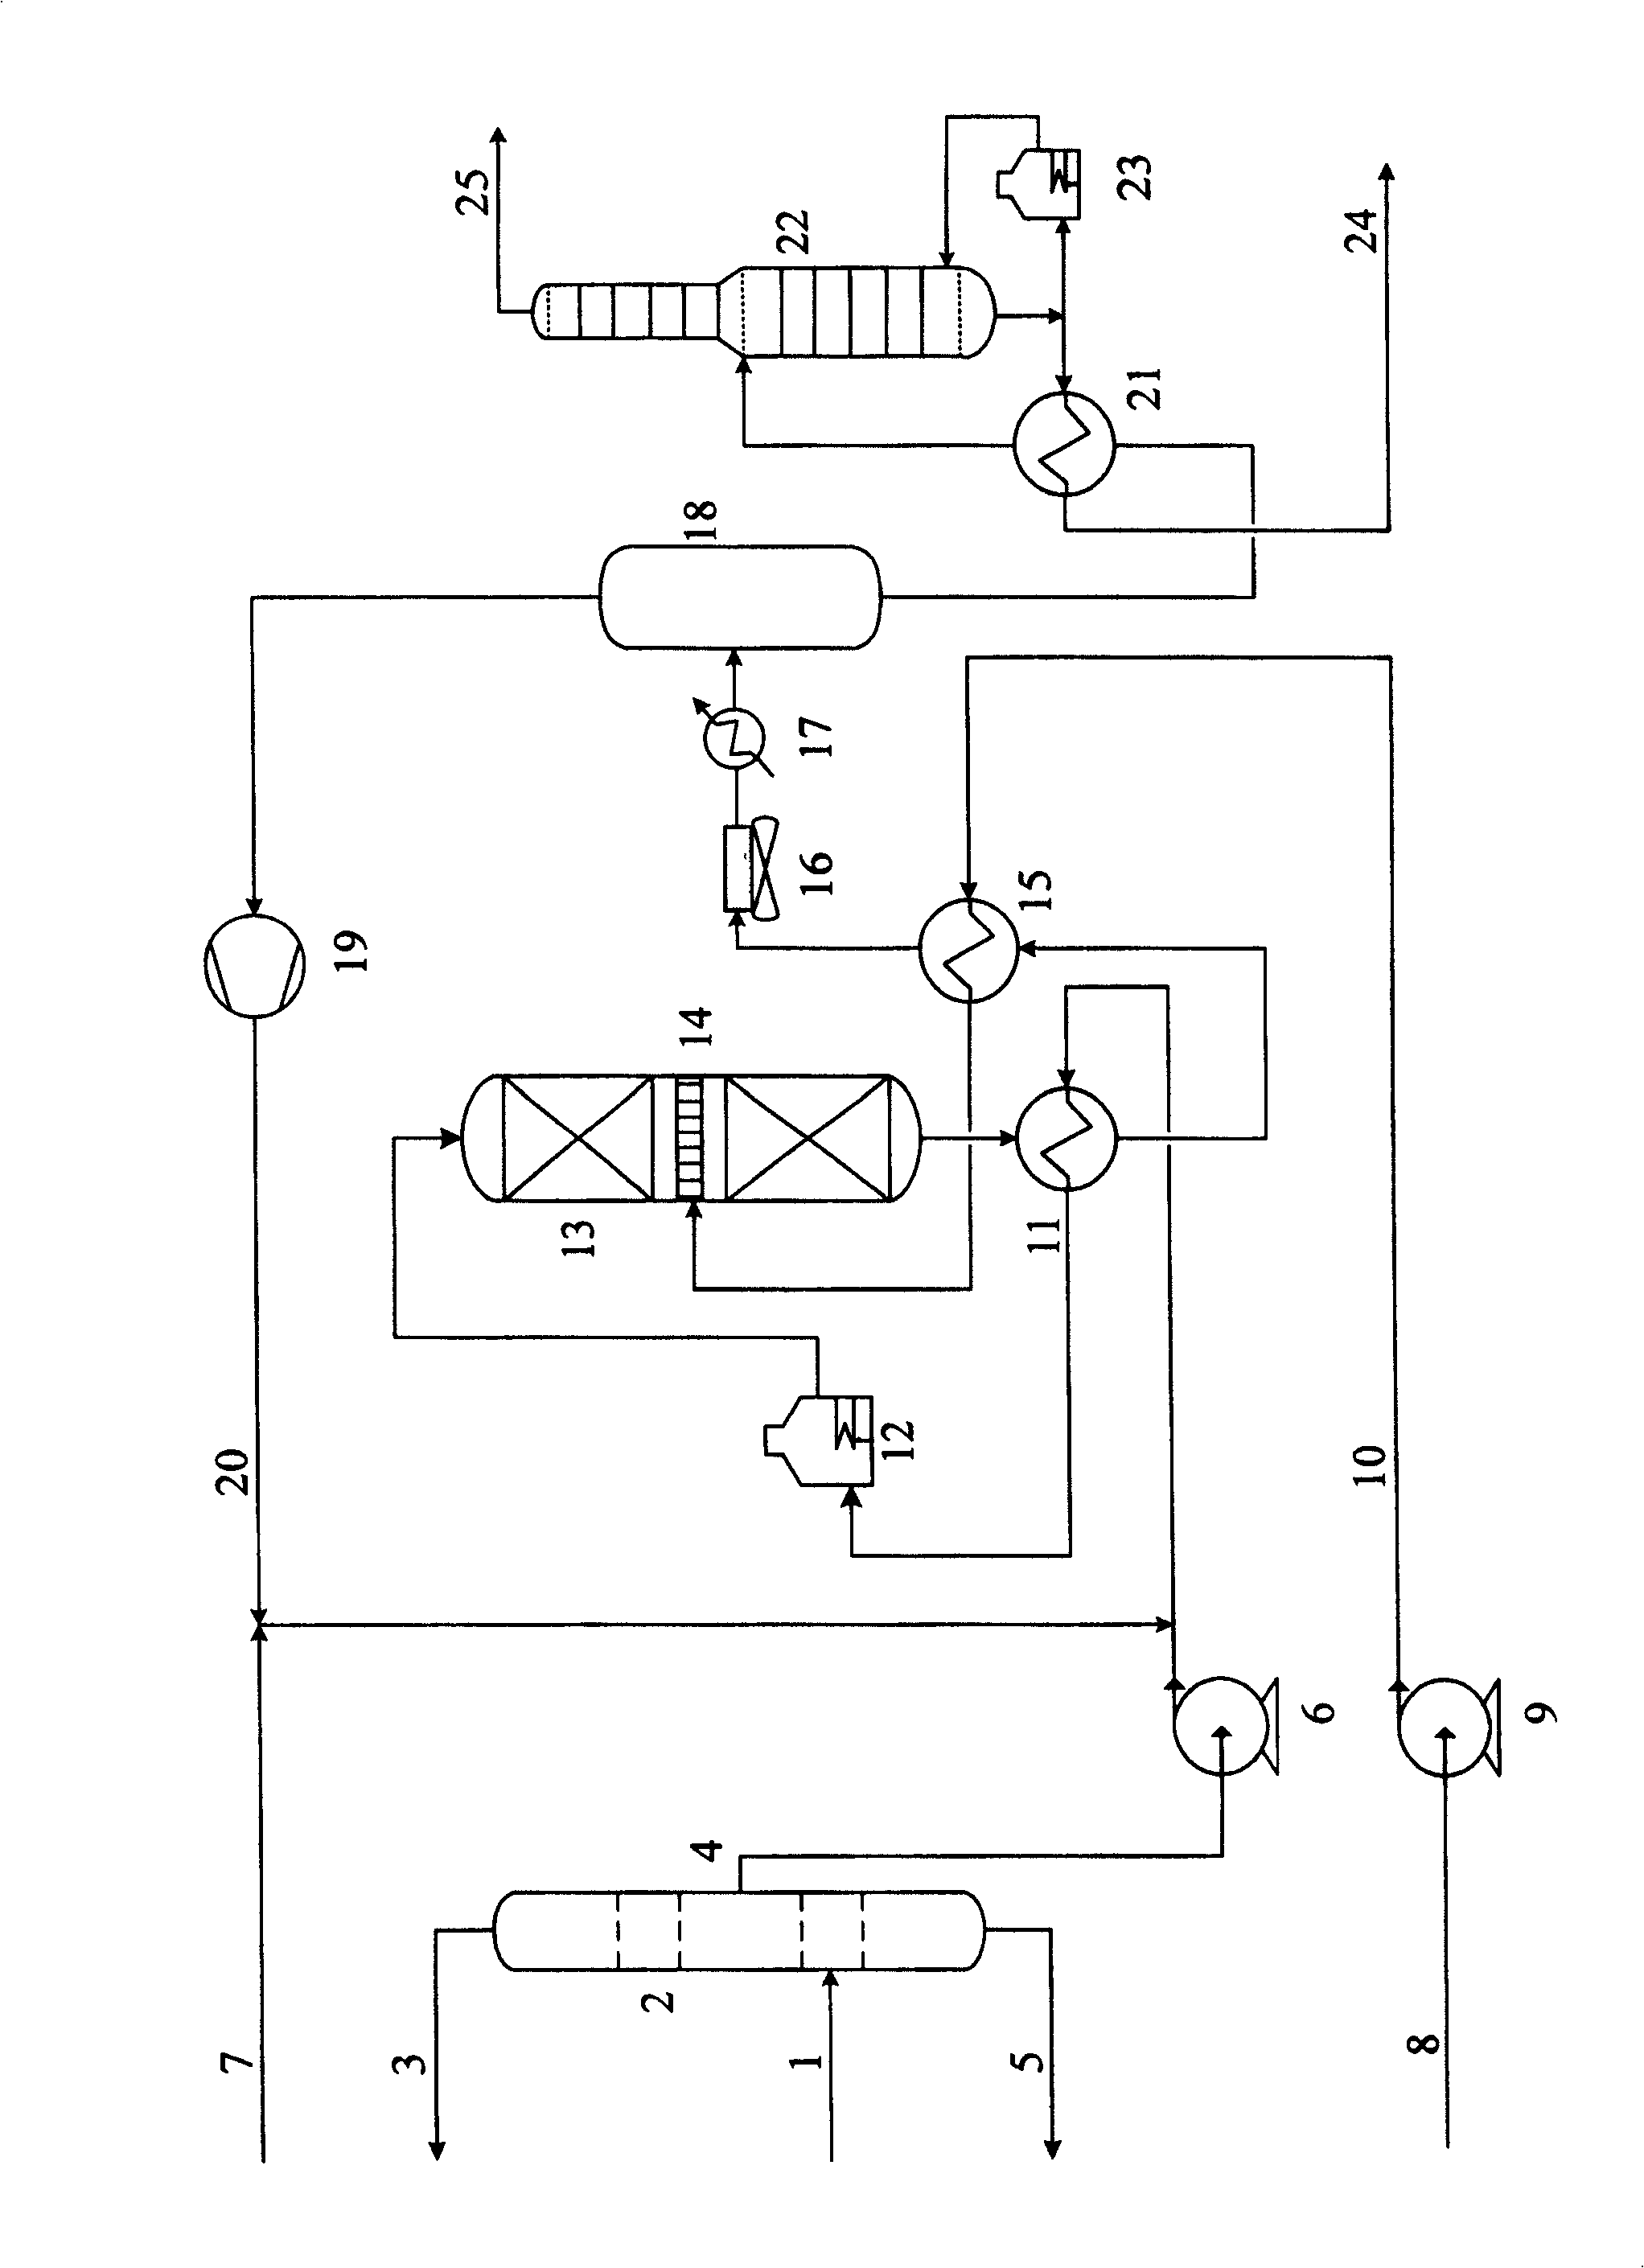 Hydrogenation method for producing catalytic reforming raw material